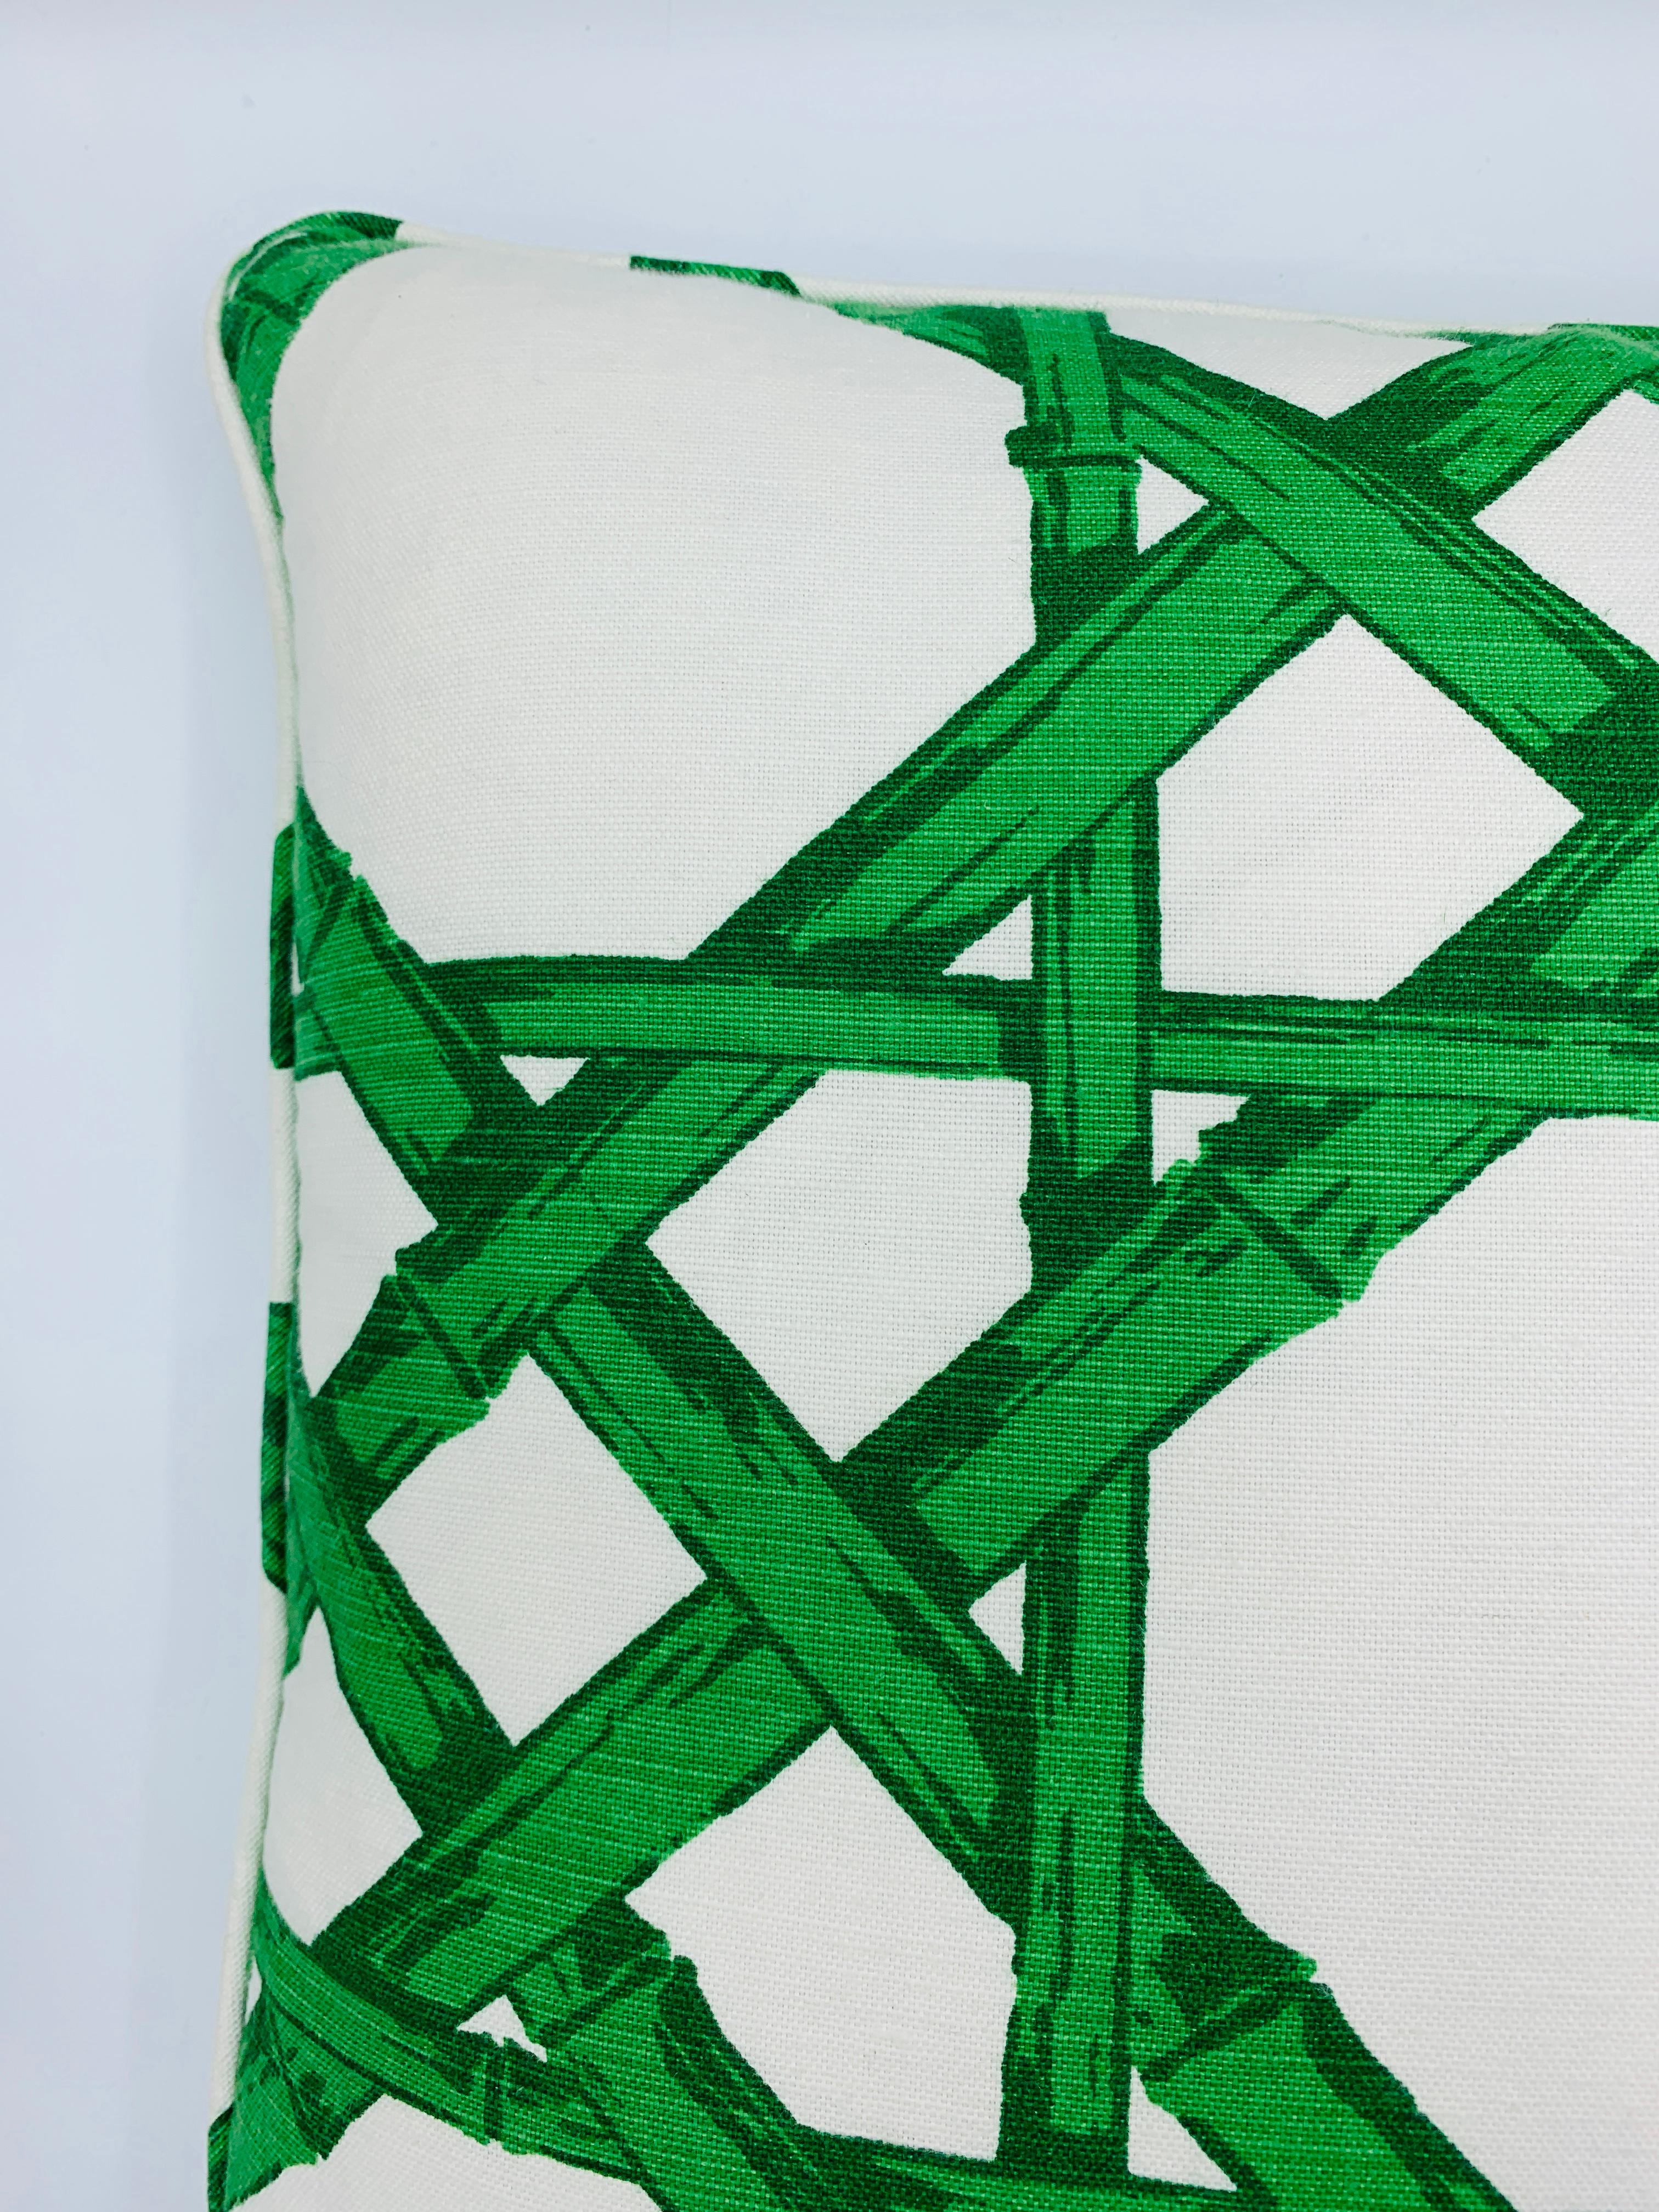 Listed is a fabulous, single custom Thibaut 'Cyrus Cane' pillow in the emerald green and white color way. The faux-bamboo lattice print is beautiful in Linen/cotton blend. Self-welt with zipper closure. Down insert included. 

   